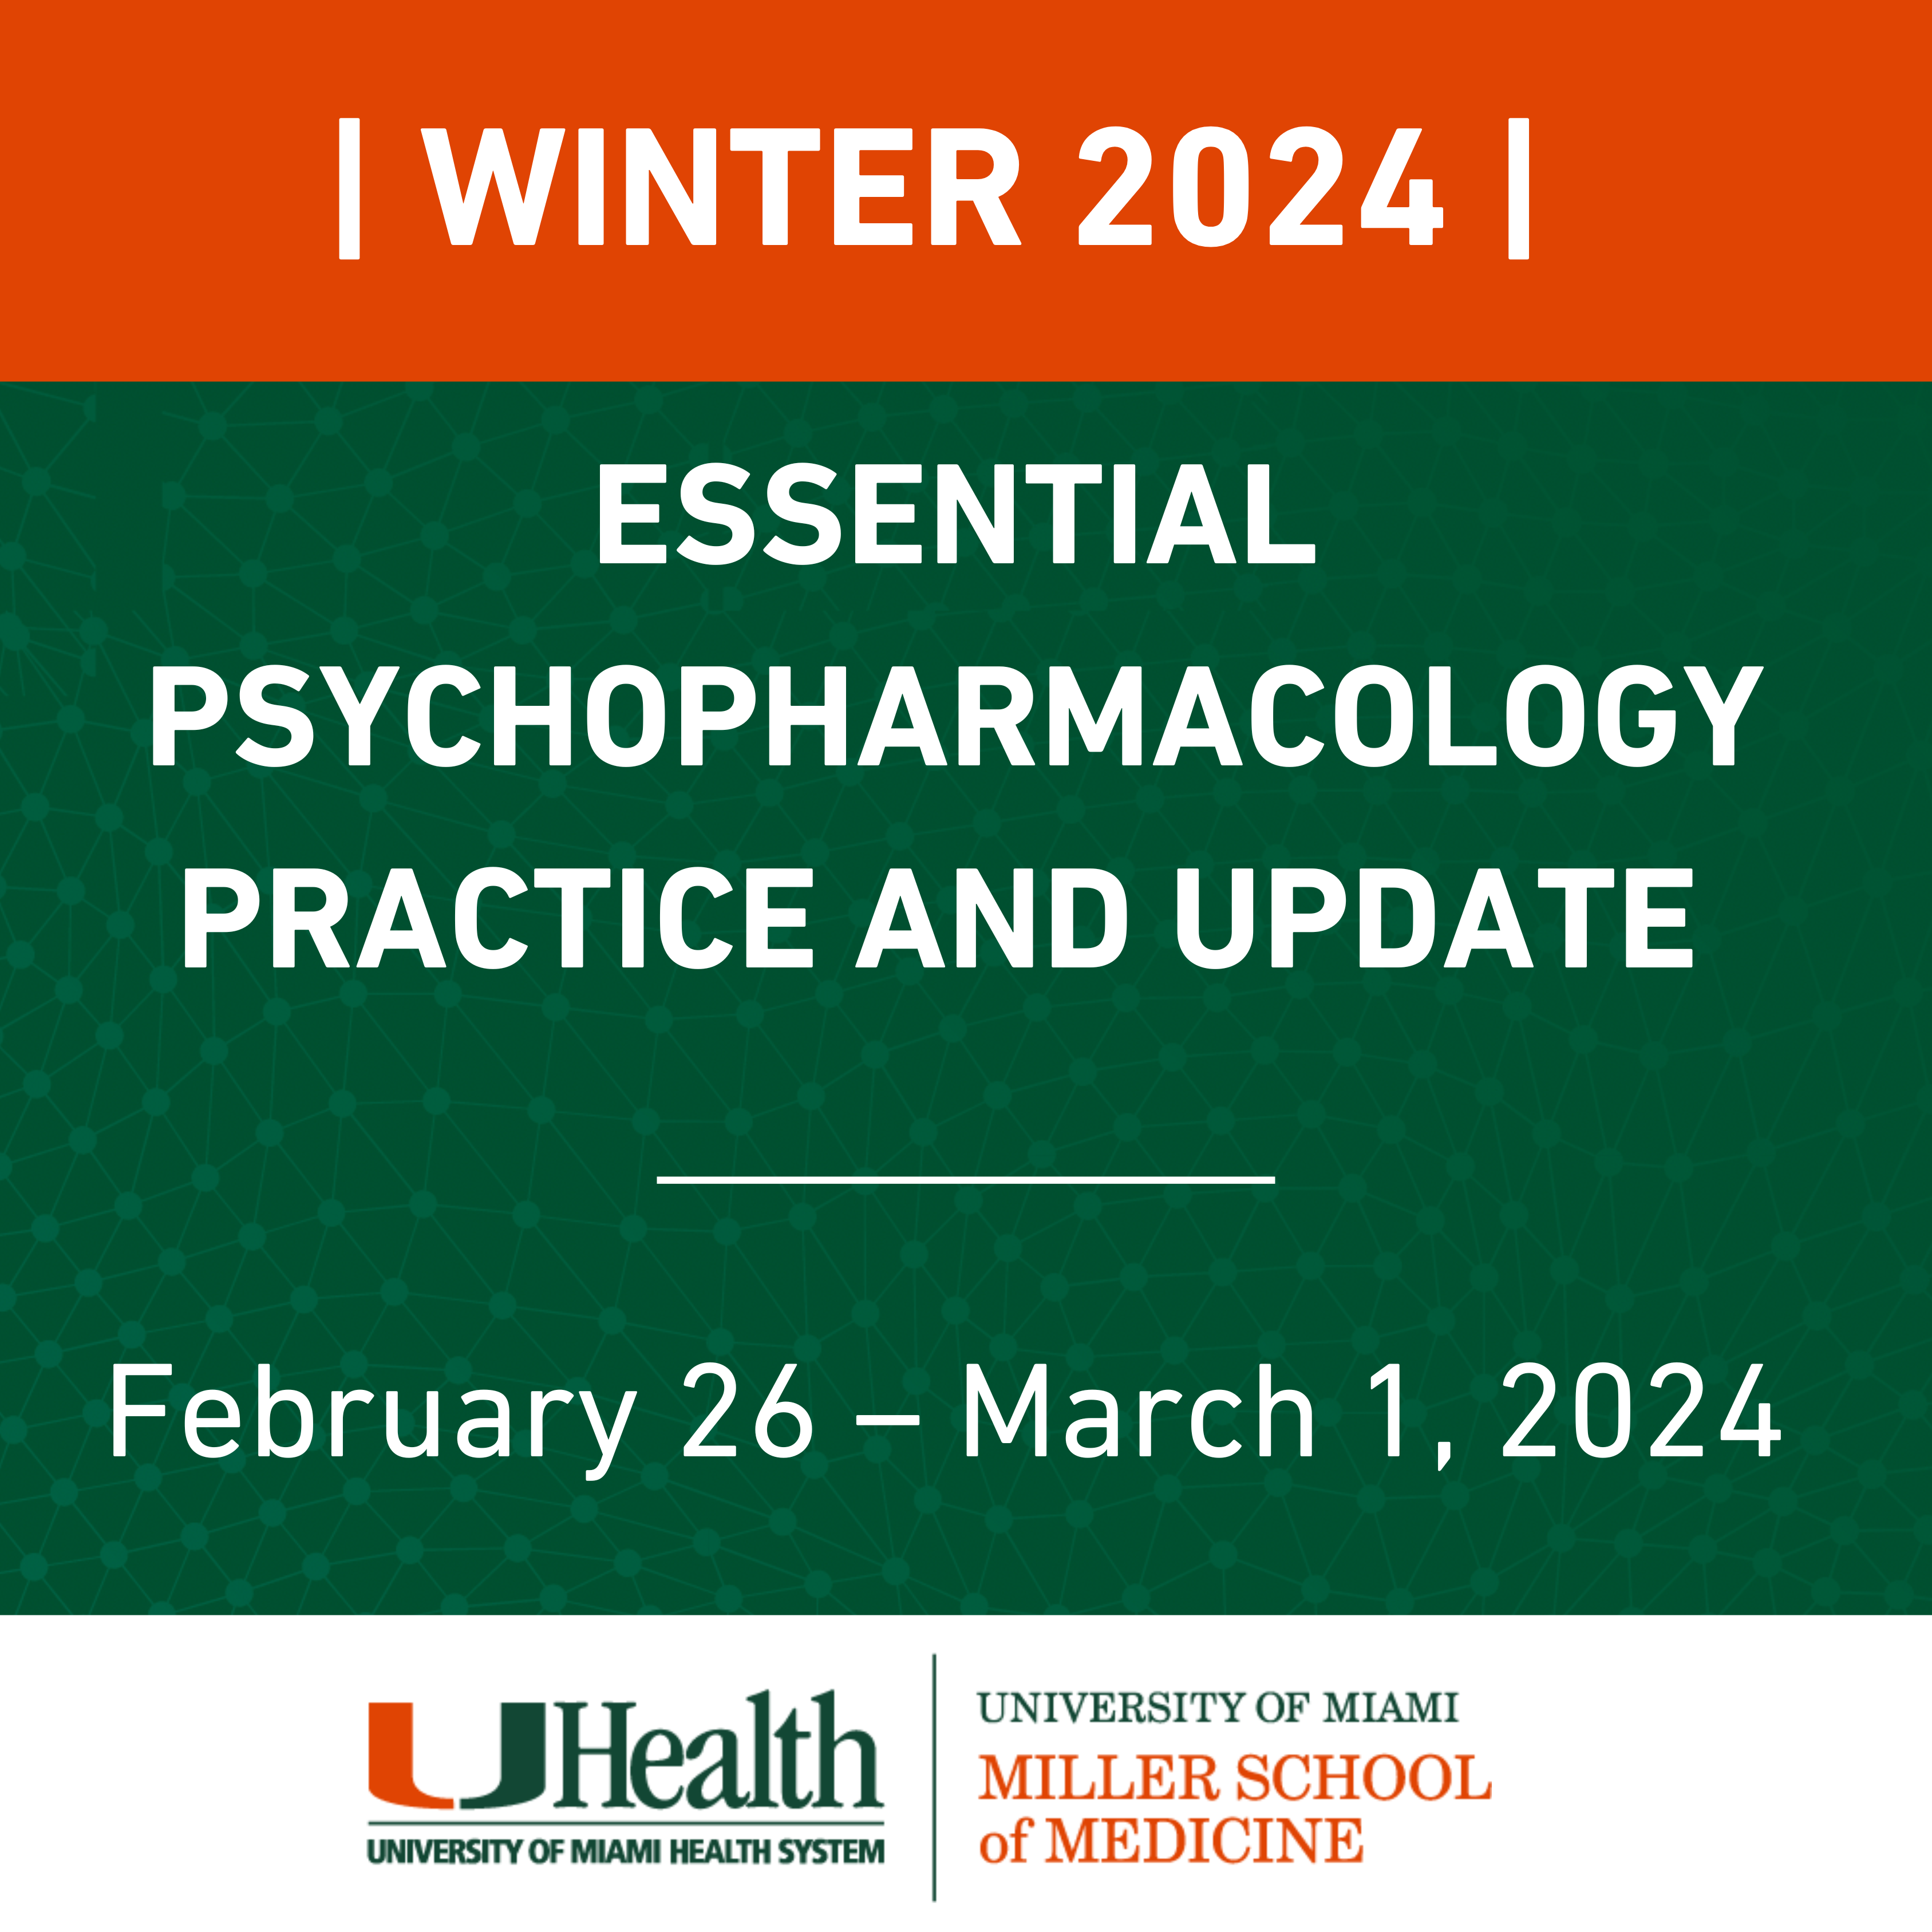 Essential Psychopharmacology Practice and Update